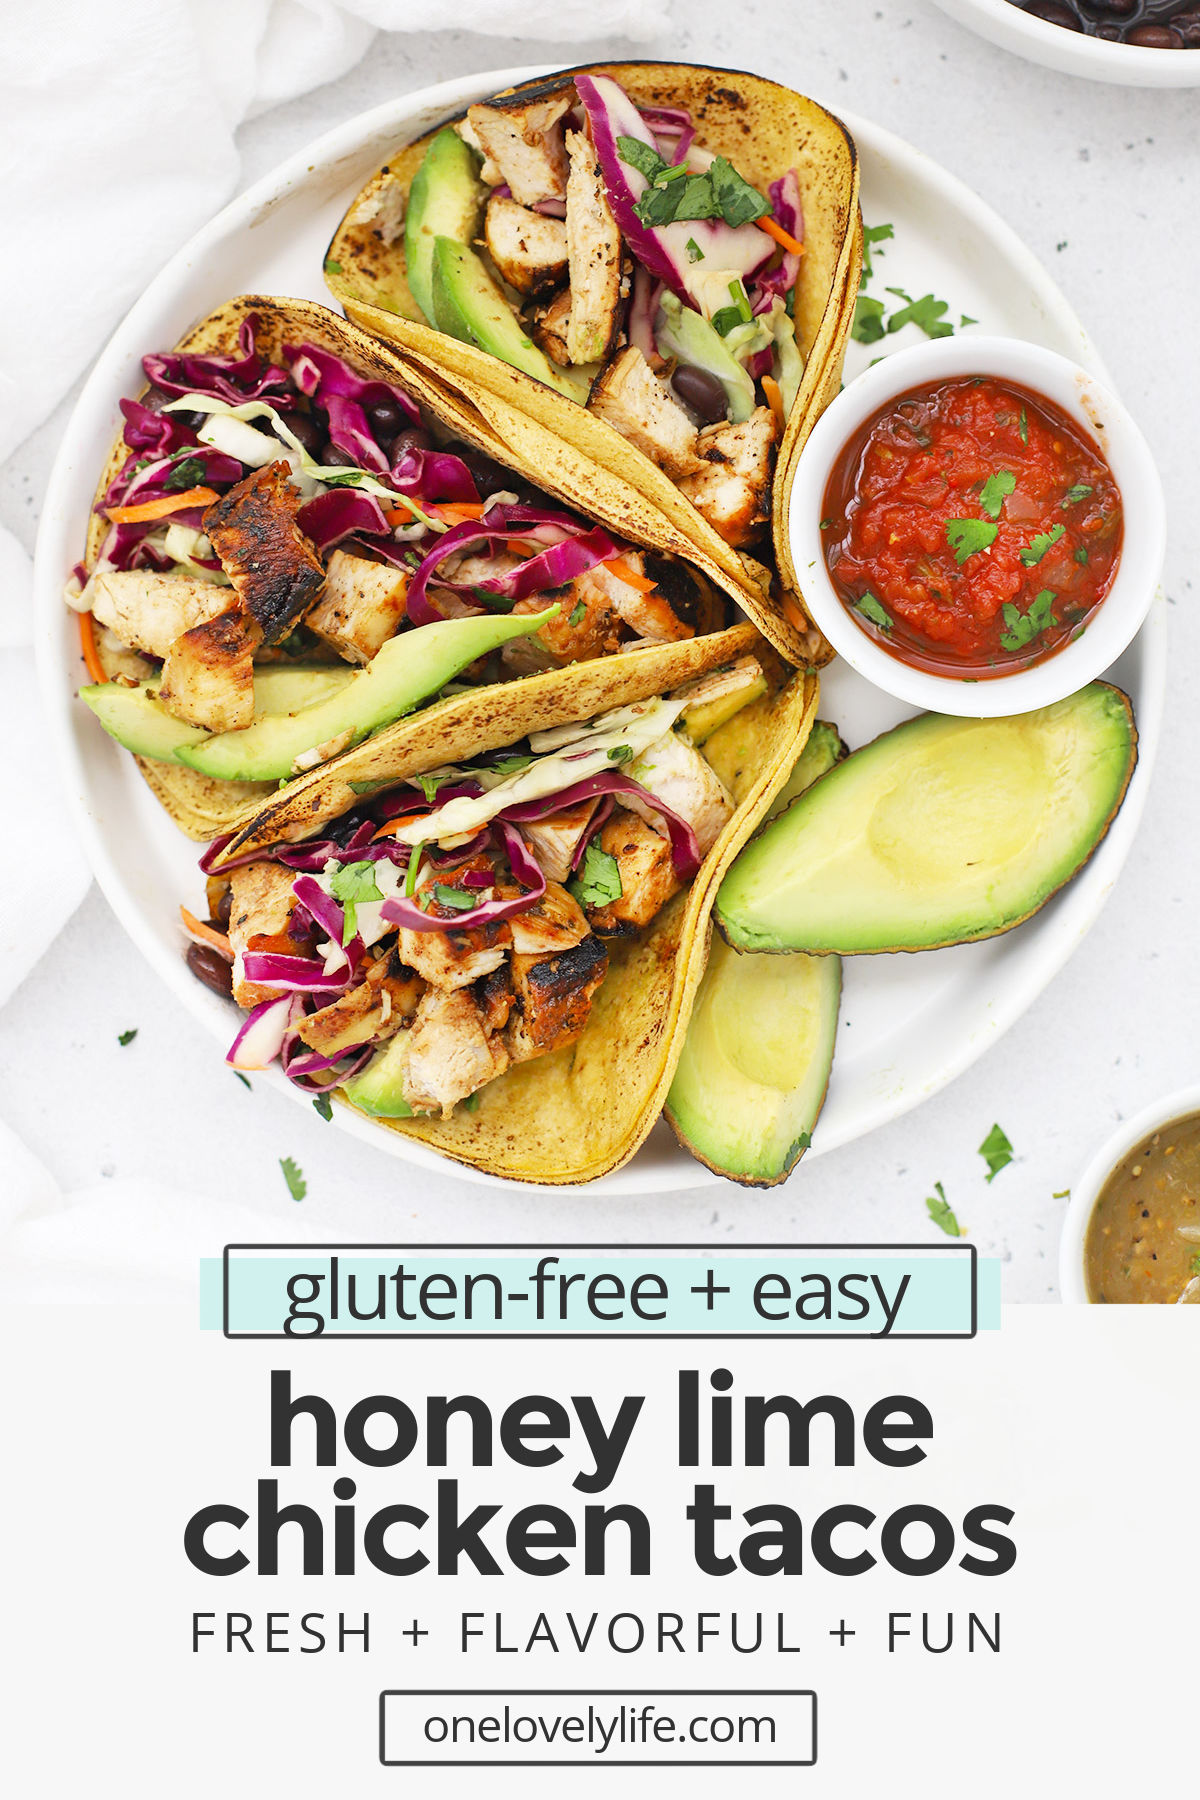 Honey Lime Chicken Tacos - Our honey lime chicken marinade gives these chicken tacos such delicious flavor. Don't miss our favorite toppings to add to these tasty tacos! (Gluten-Free) // Chicken Tacos recipe // Lime Chicken Tacos // Chili Lime Chicken Tacos // healthy chicken tacos // the best chicken tacos // grilled chicken tacos